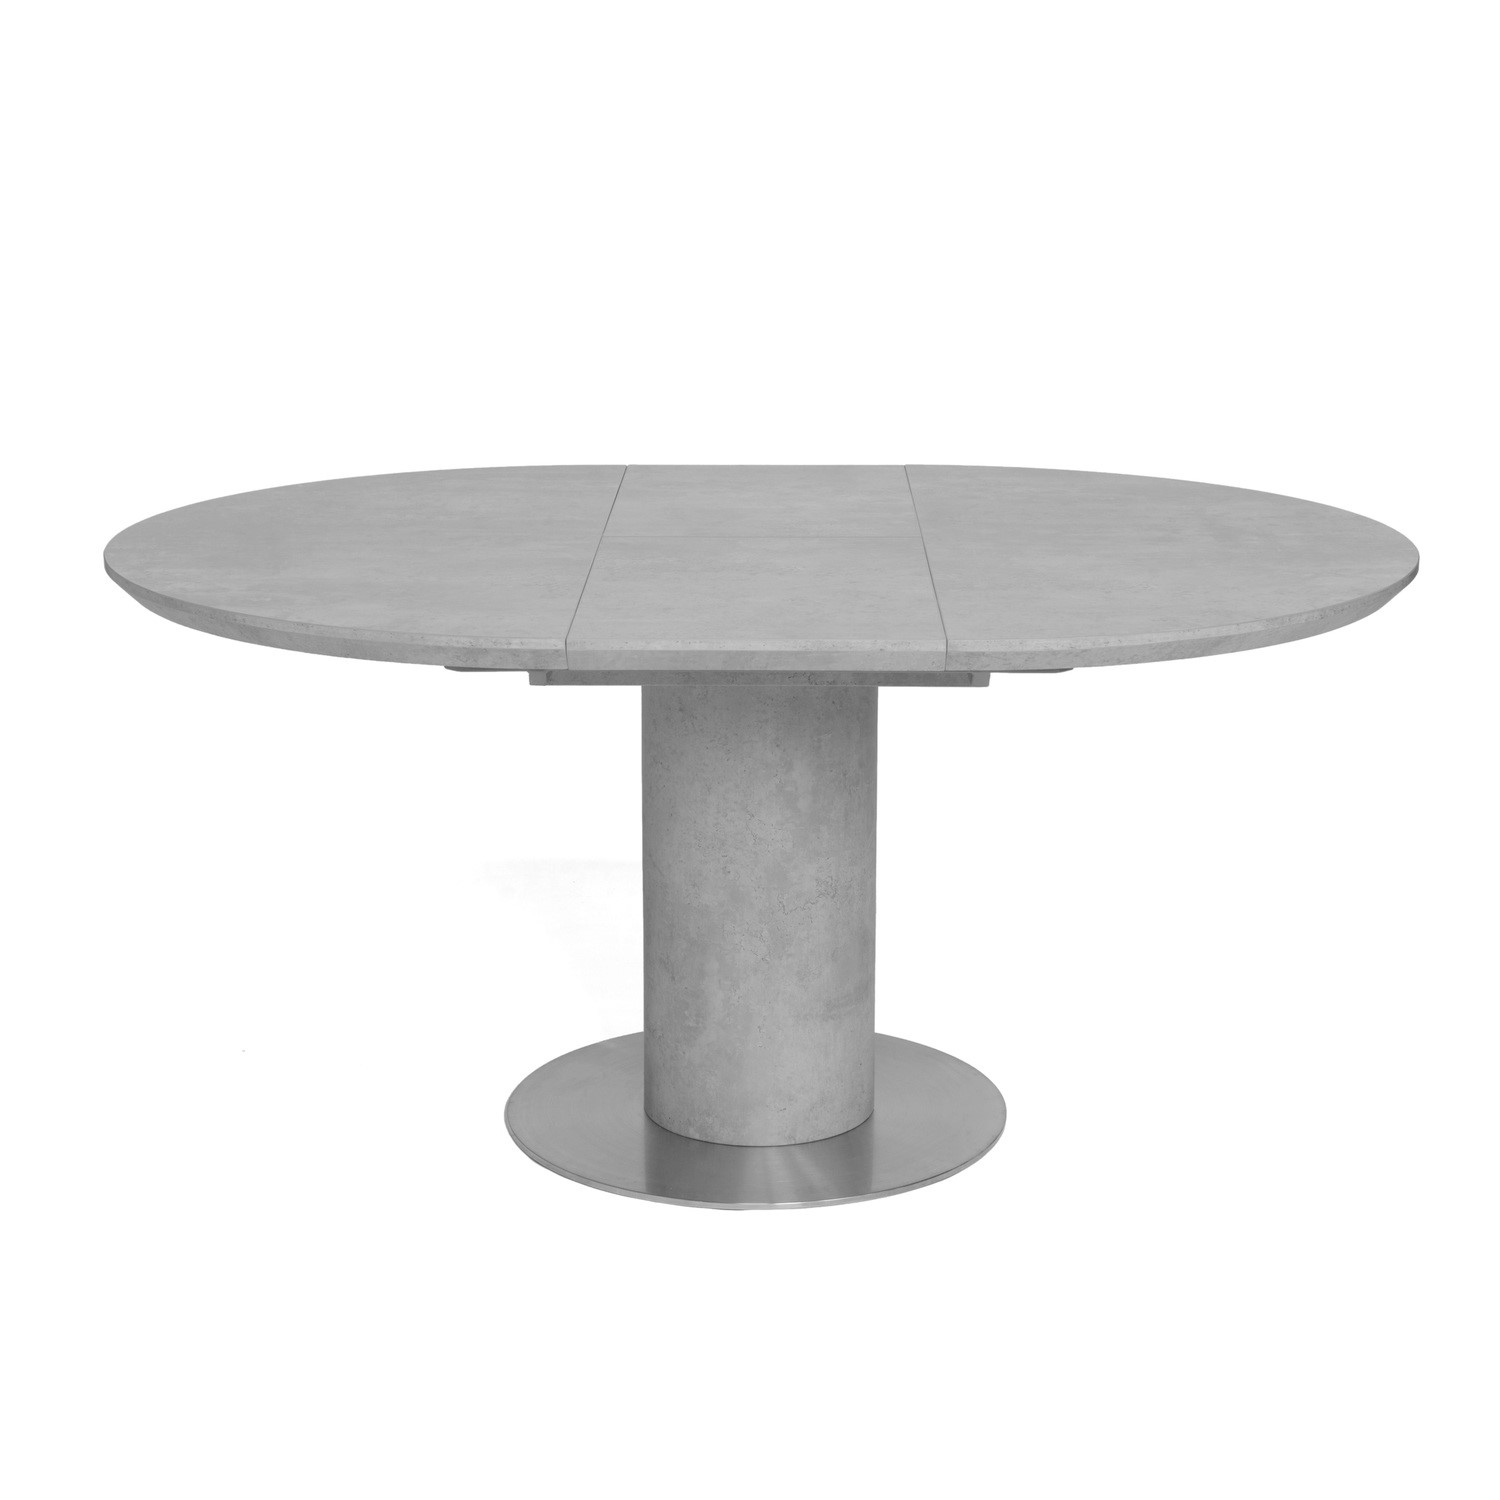 Round Extendable Dining Table In Grey, Modern Round Extending Dining Table Uk